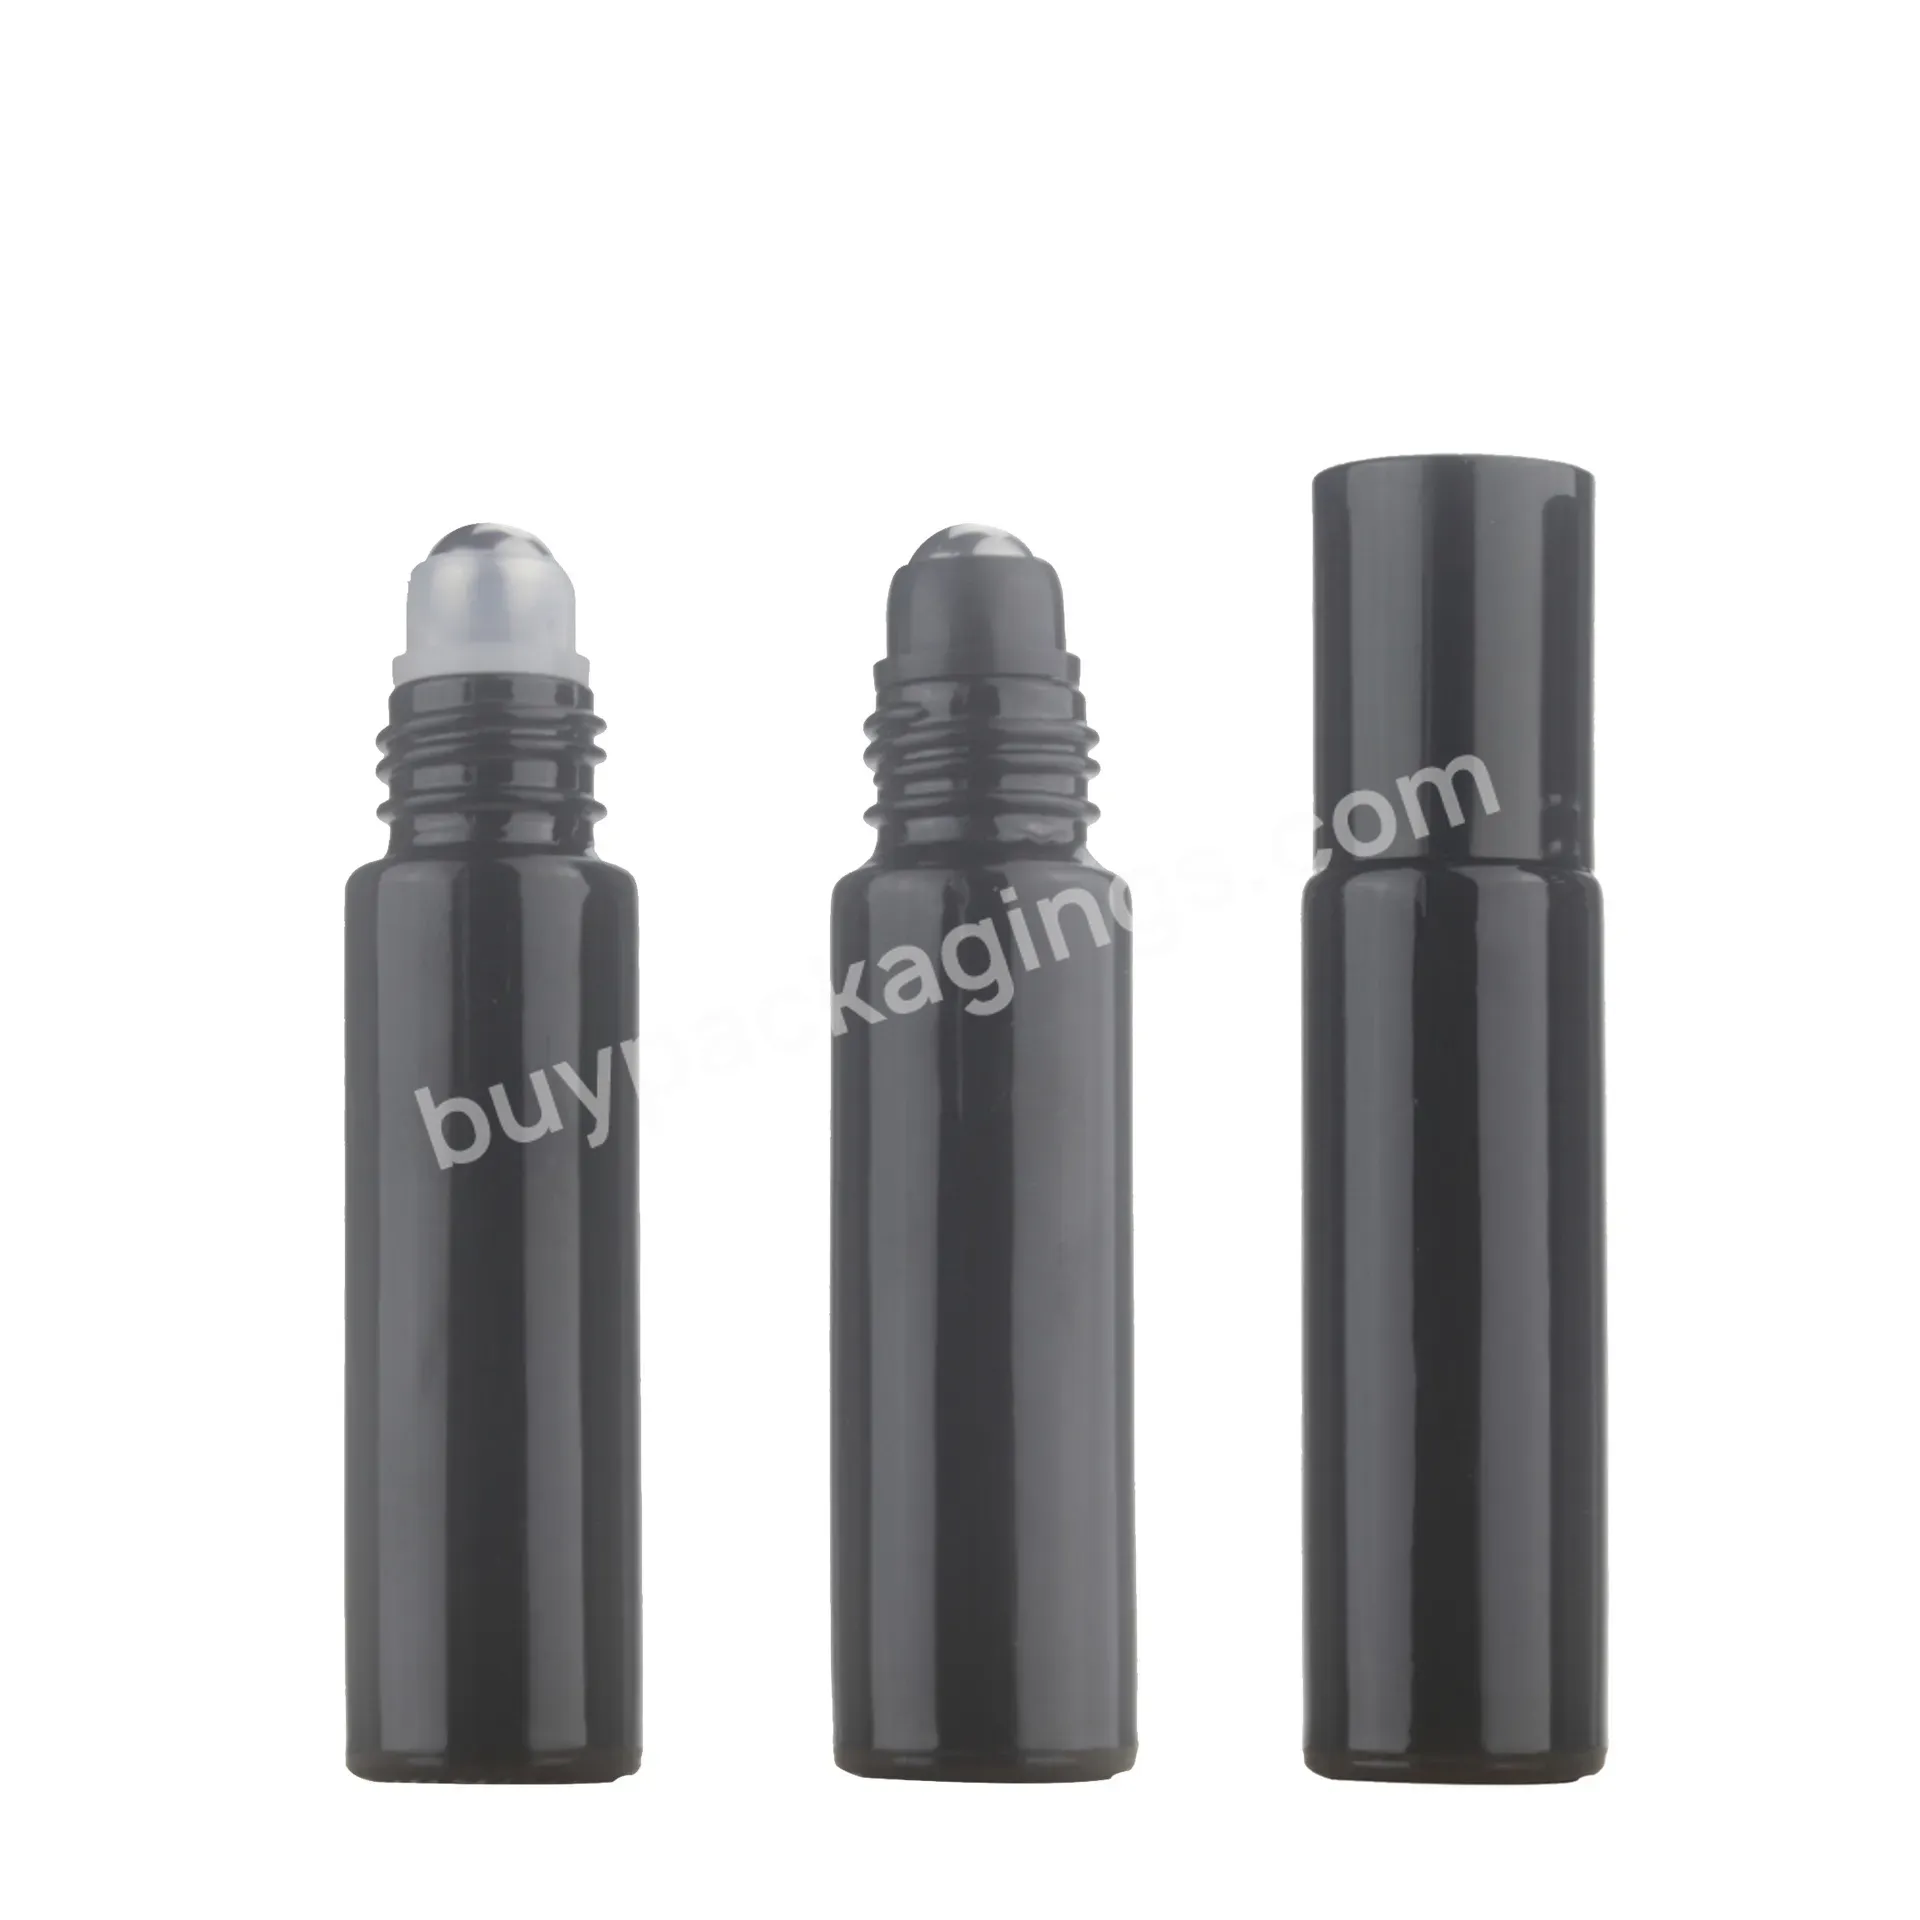 10 Ml Black Glossy Glass Roll-on Bottles With Stainless Steel Roller Balls For Essential Oils Colognes & Perfumes